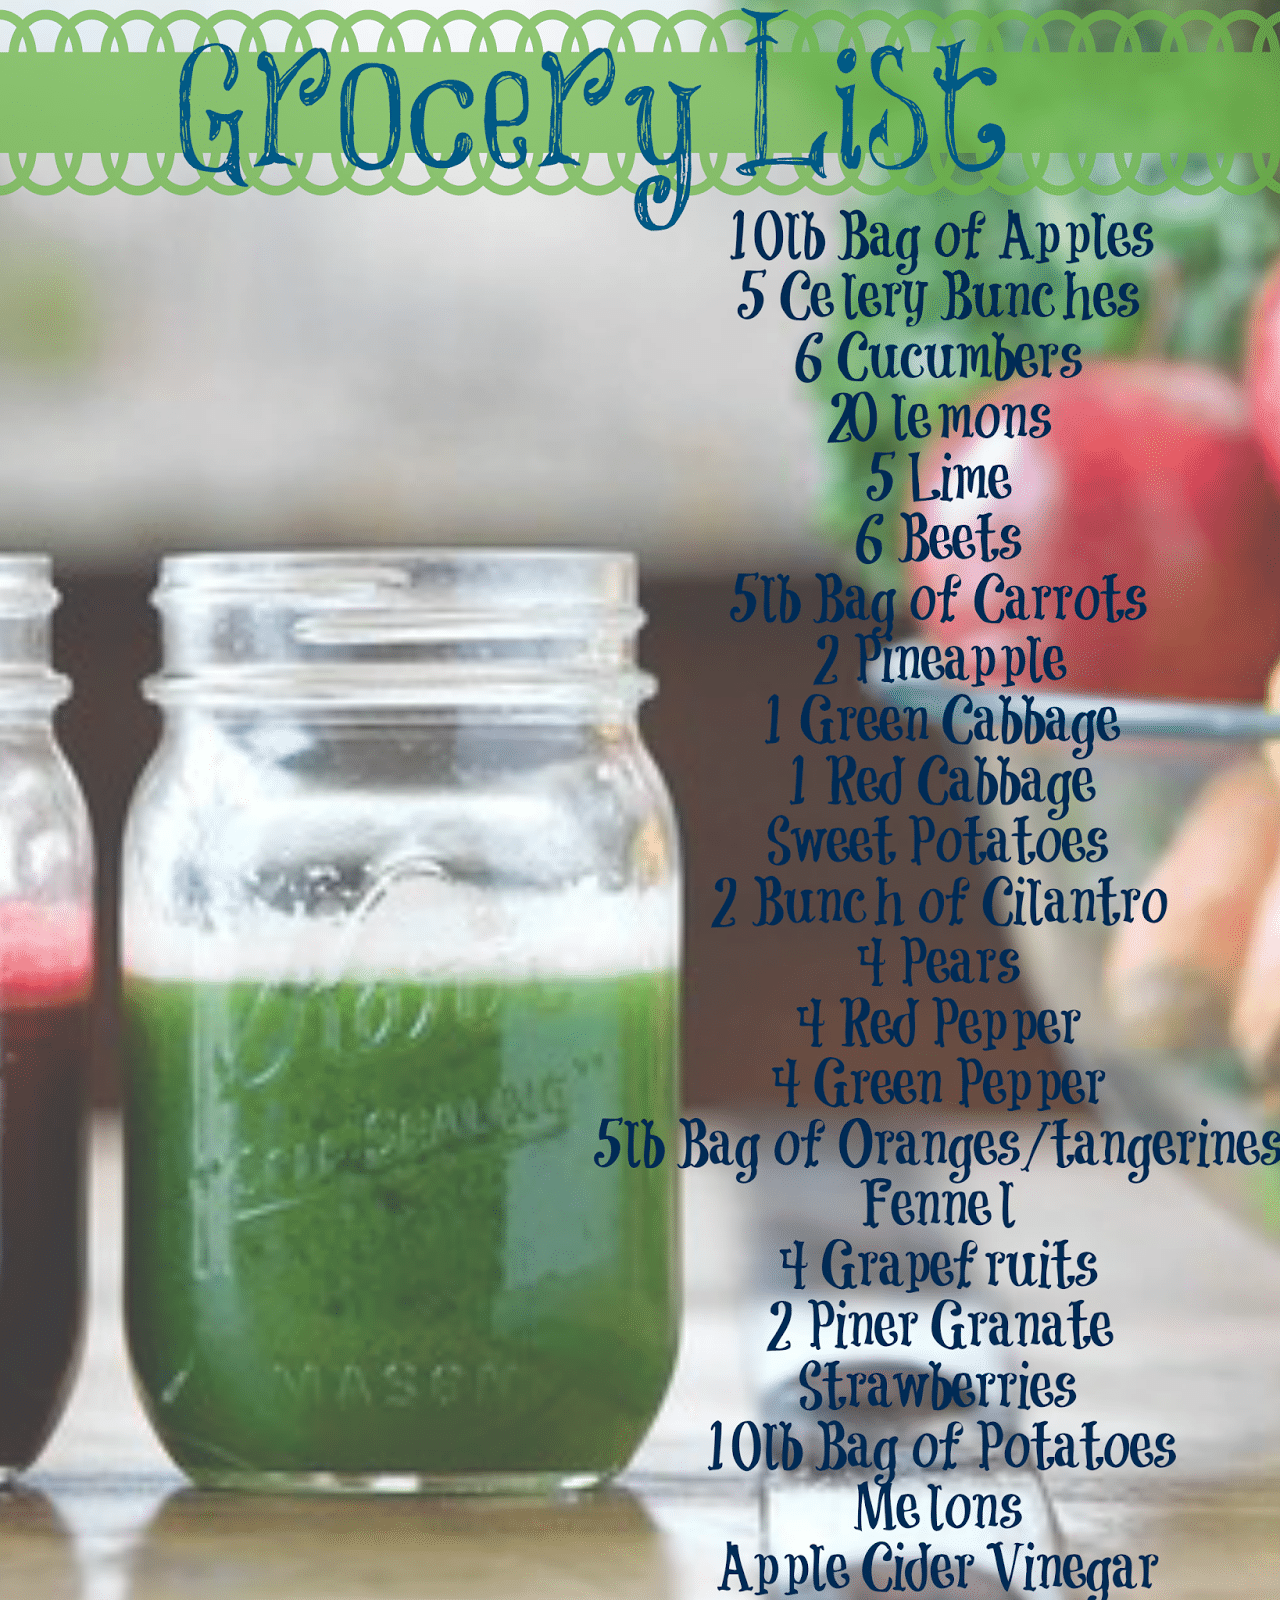 All Things Sara: 7 Day Juice Fast!